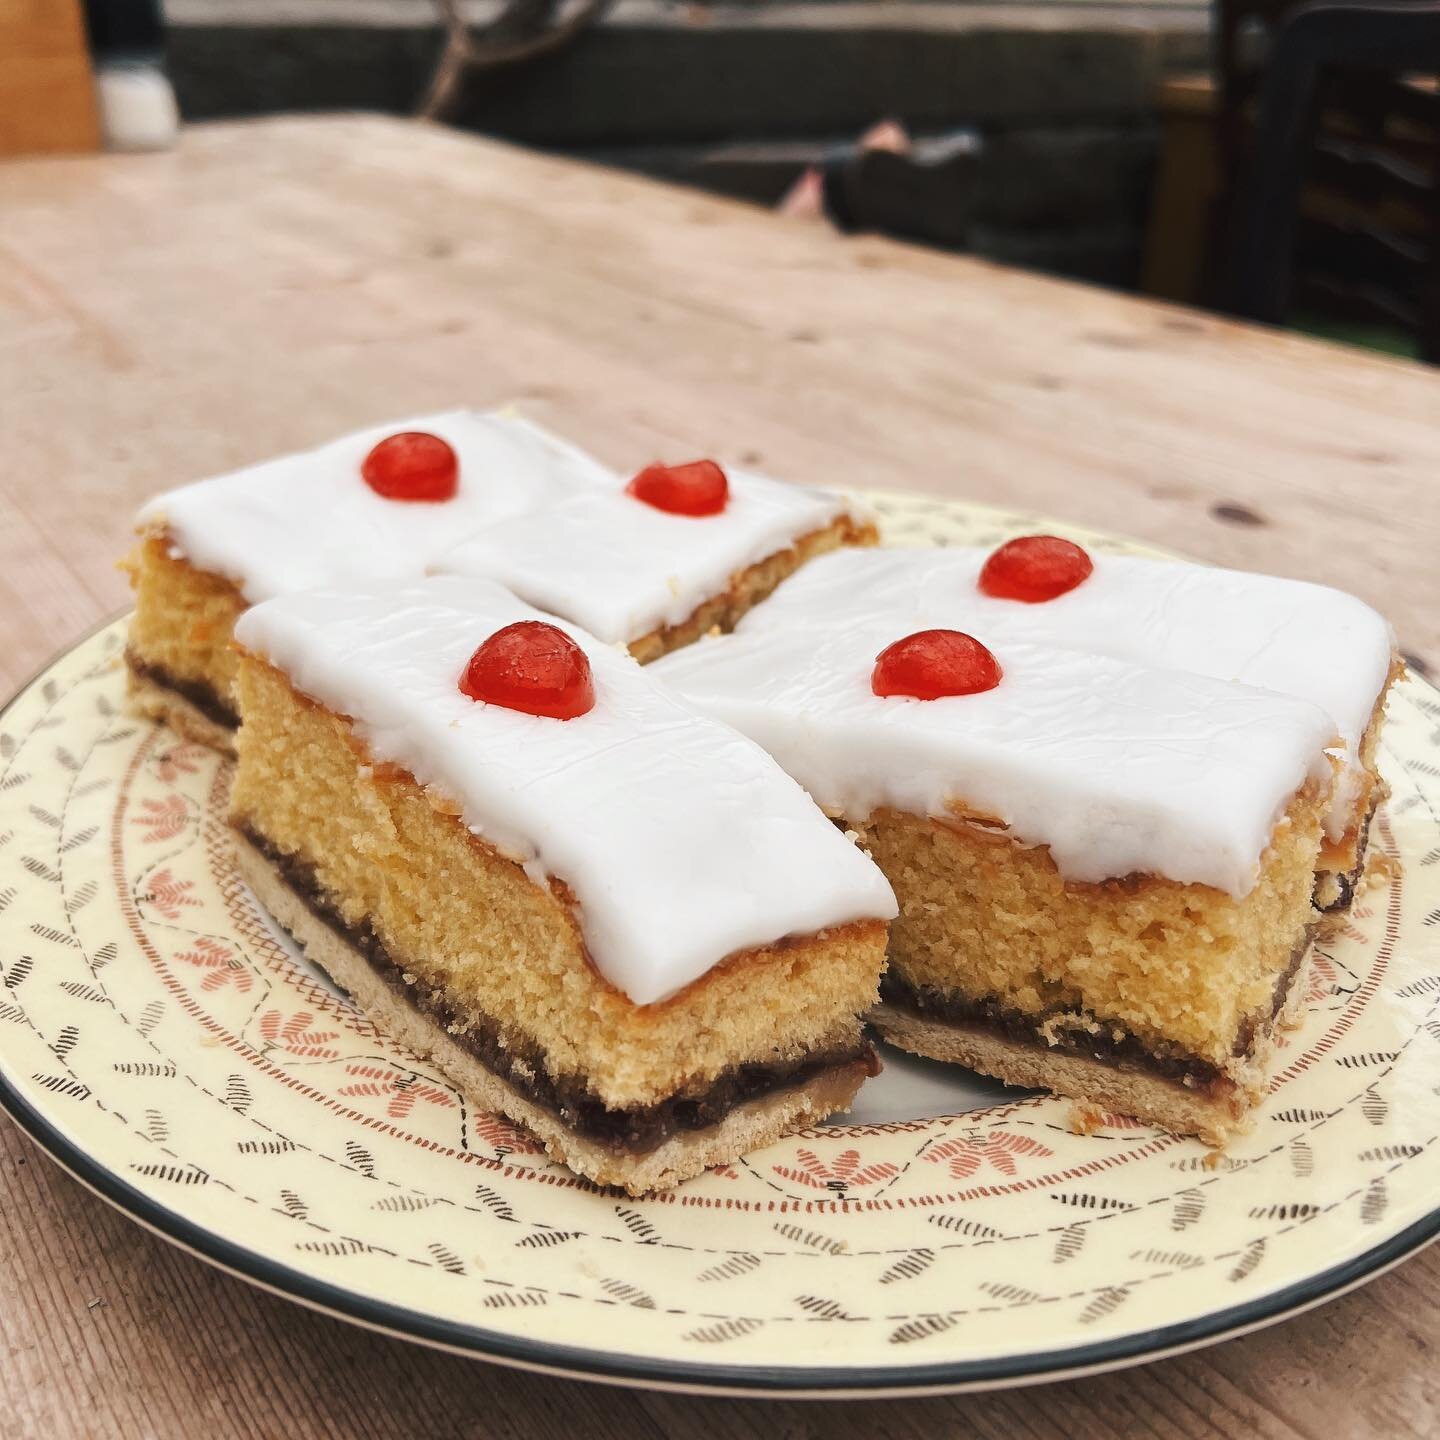 ᴀғᴛᴇʀɴᴏᴏɴ sᴡᴇᴇᴛ ᴛʀᴇᴀᴛs. 

Our yummy sweet selection has something for everyone, including these delicious bakewell slices! 
.
.
.
.
.
#applestore #applestorecafe #cafe #wyresdale #wyresdalepark #cake #cakes #bakewell #coffeeandcake #yum #delicious #s